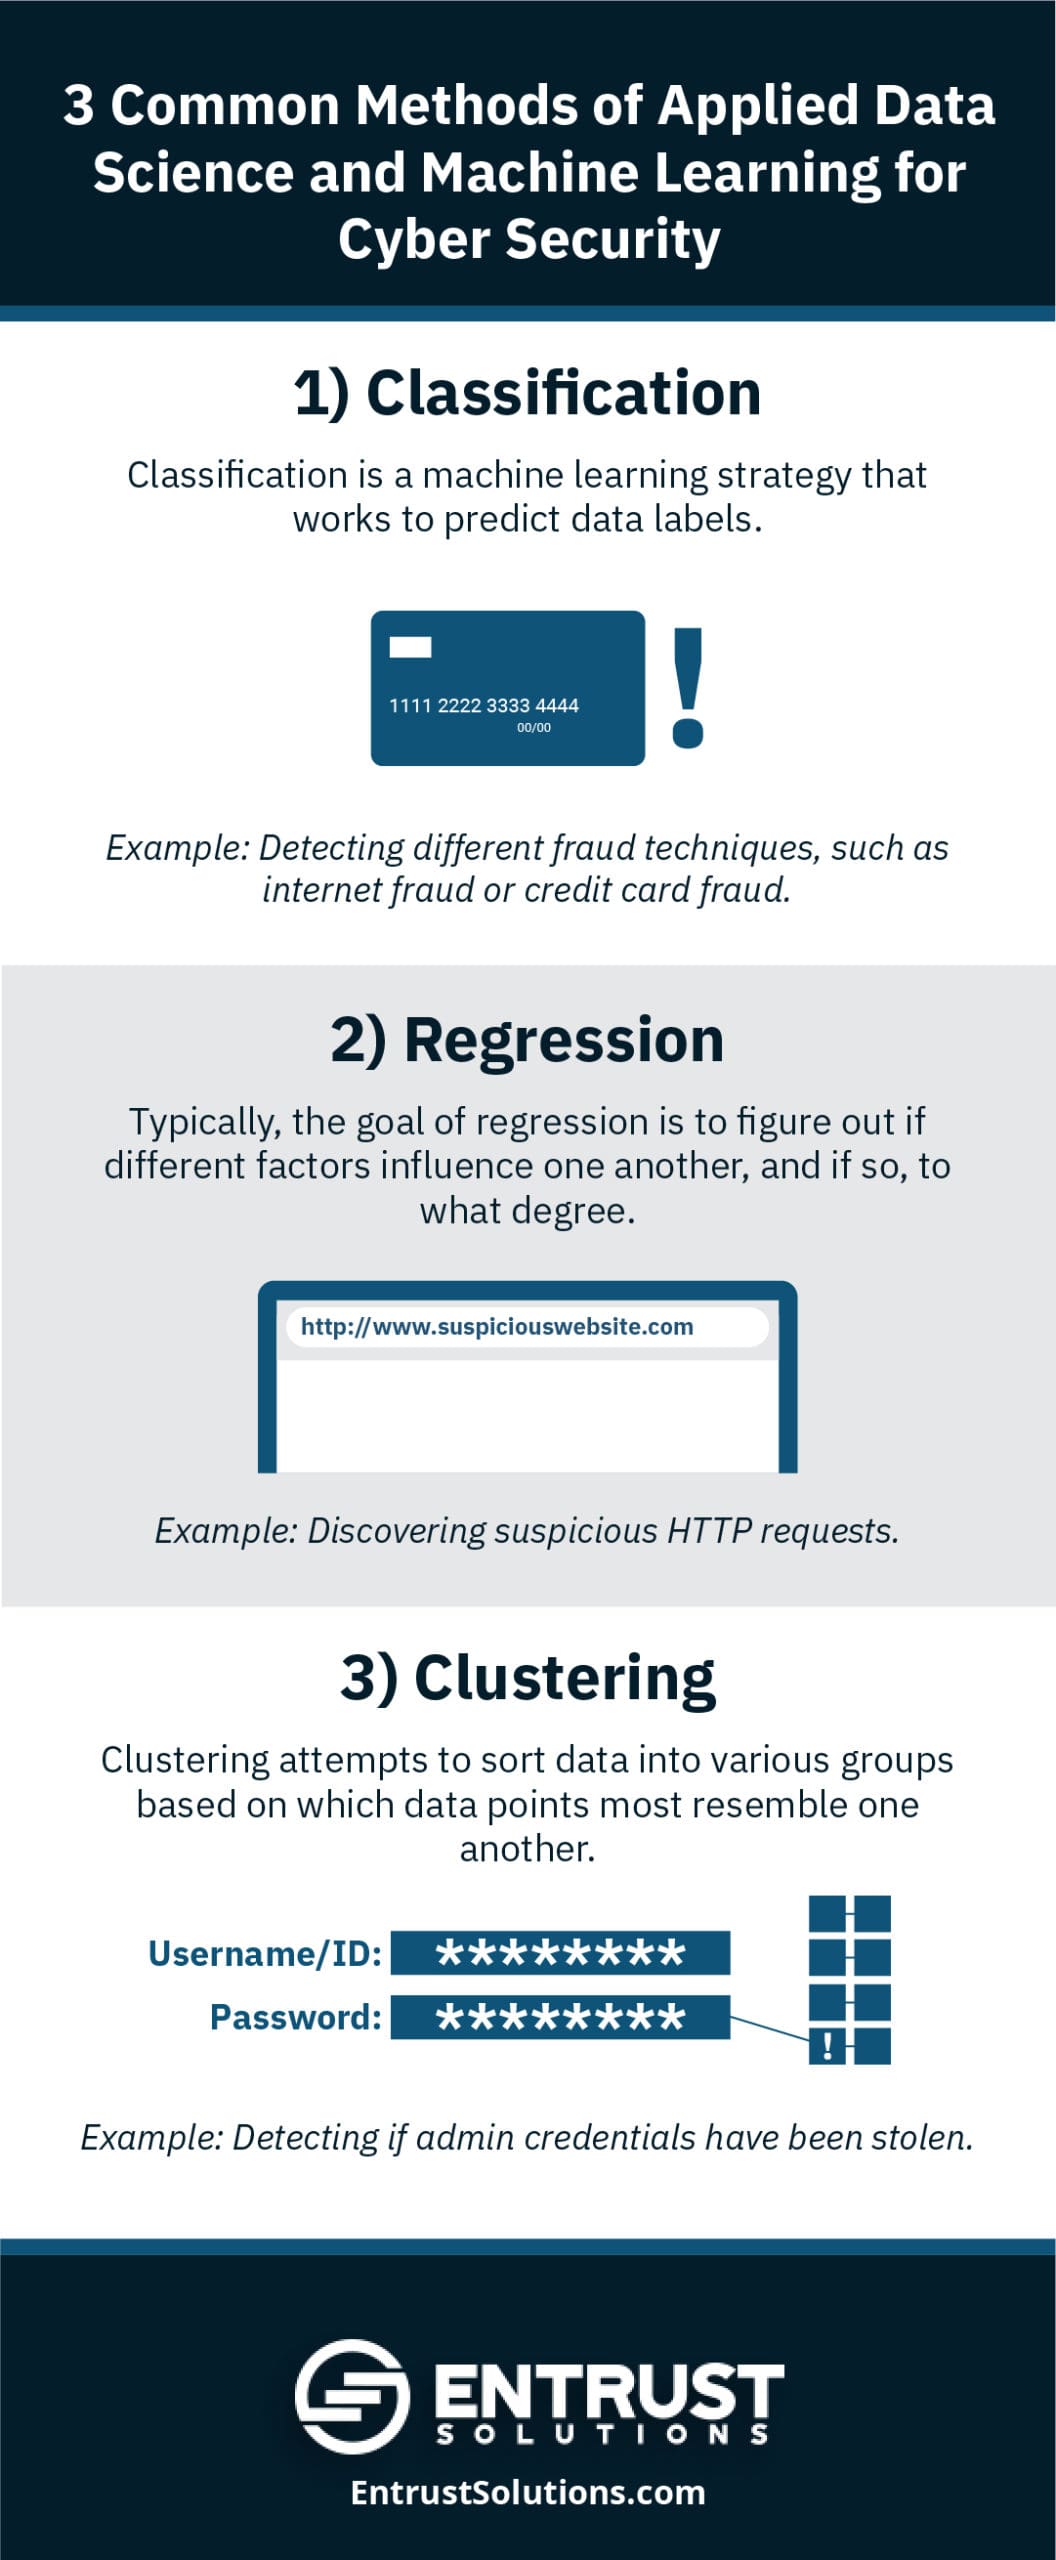 Entrust infograph describing the three common methods of using applied data science and machine learning for cyber security.